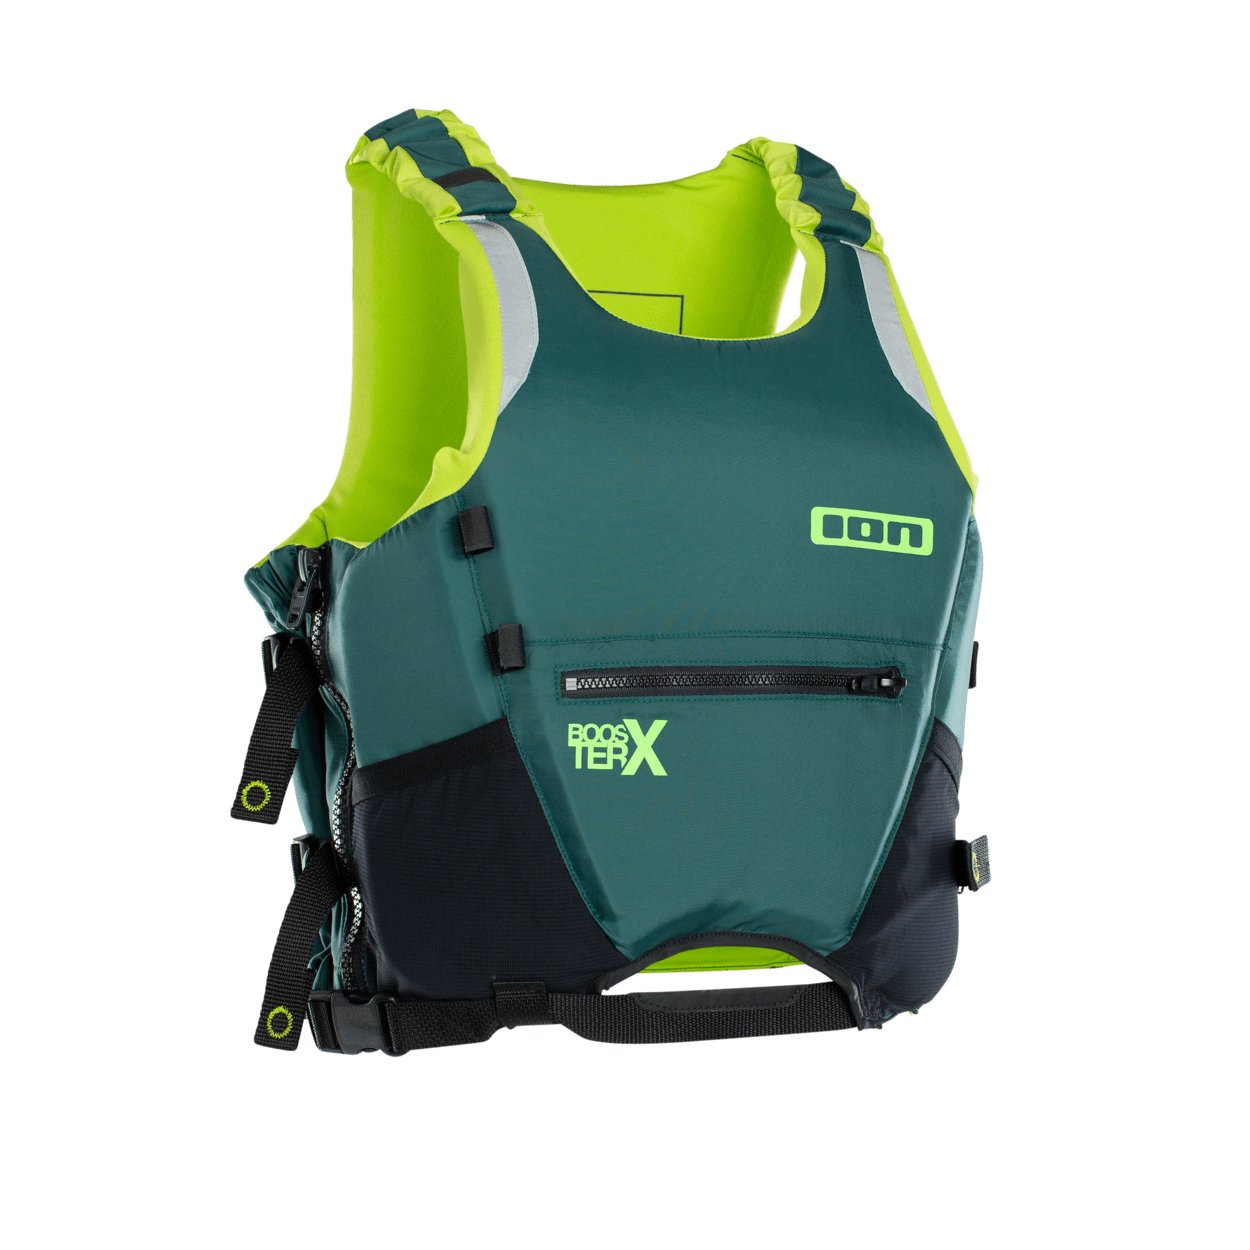 ION Booster X Vest Side Zip 2022 - Worthing Watersports - 9008415982806 - Protection - ION Water